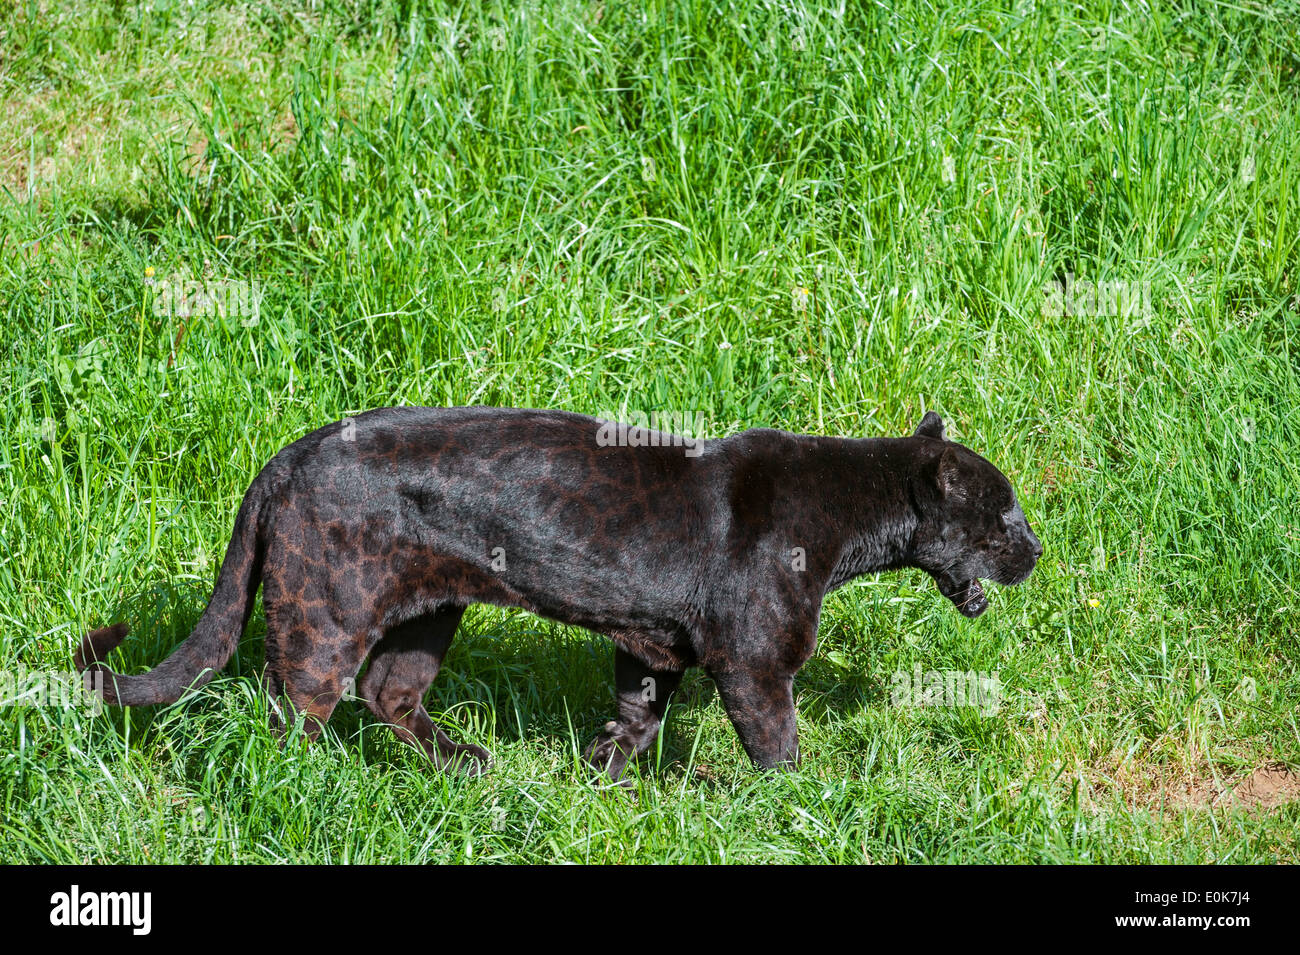 Black panther / melanistic jaguar (Panthera onca) walking in grassland, native to Central and South America Stock Photo